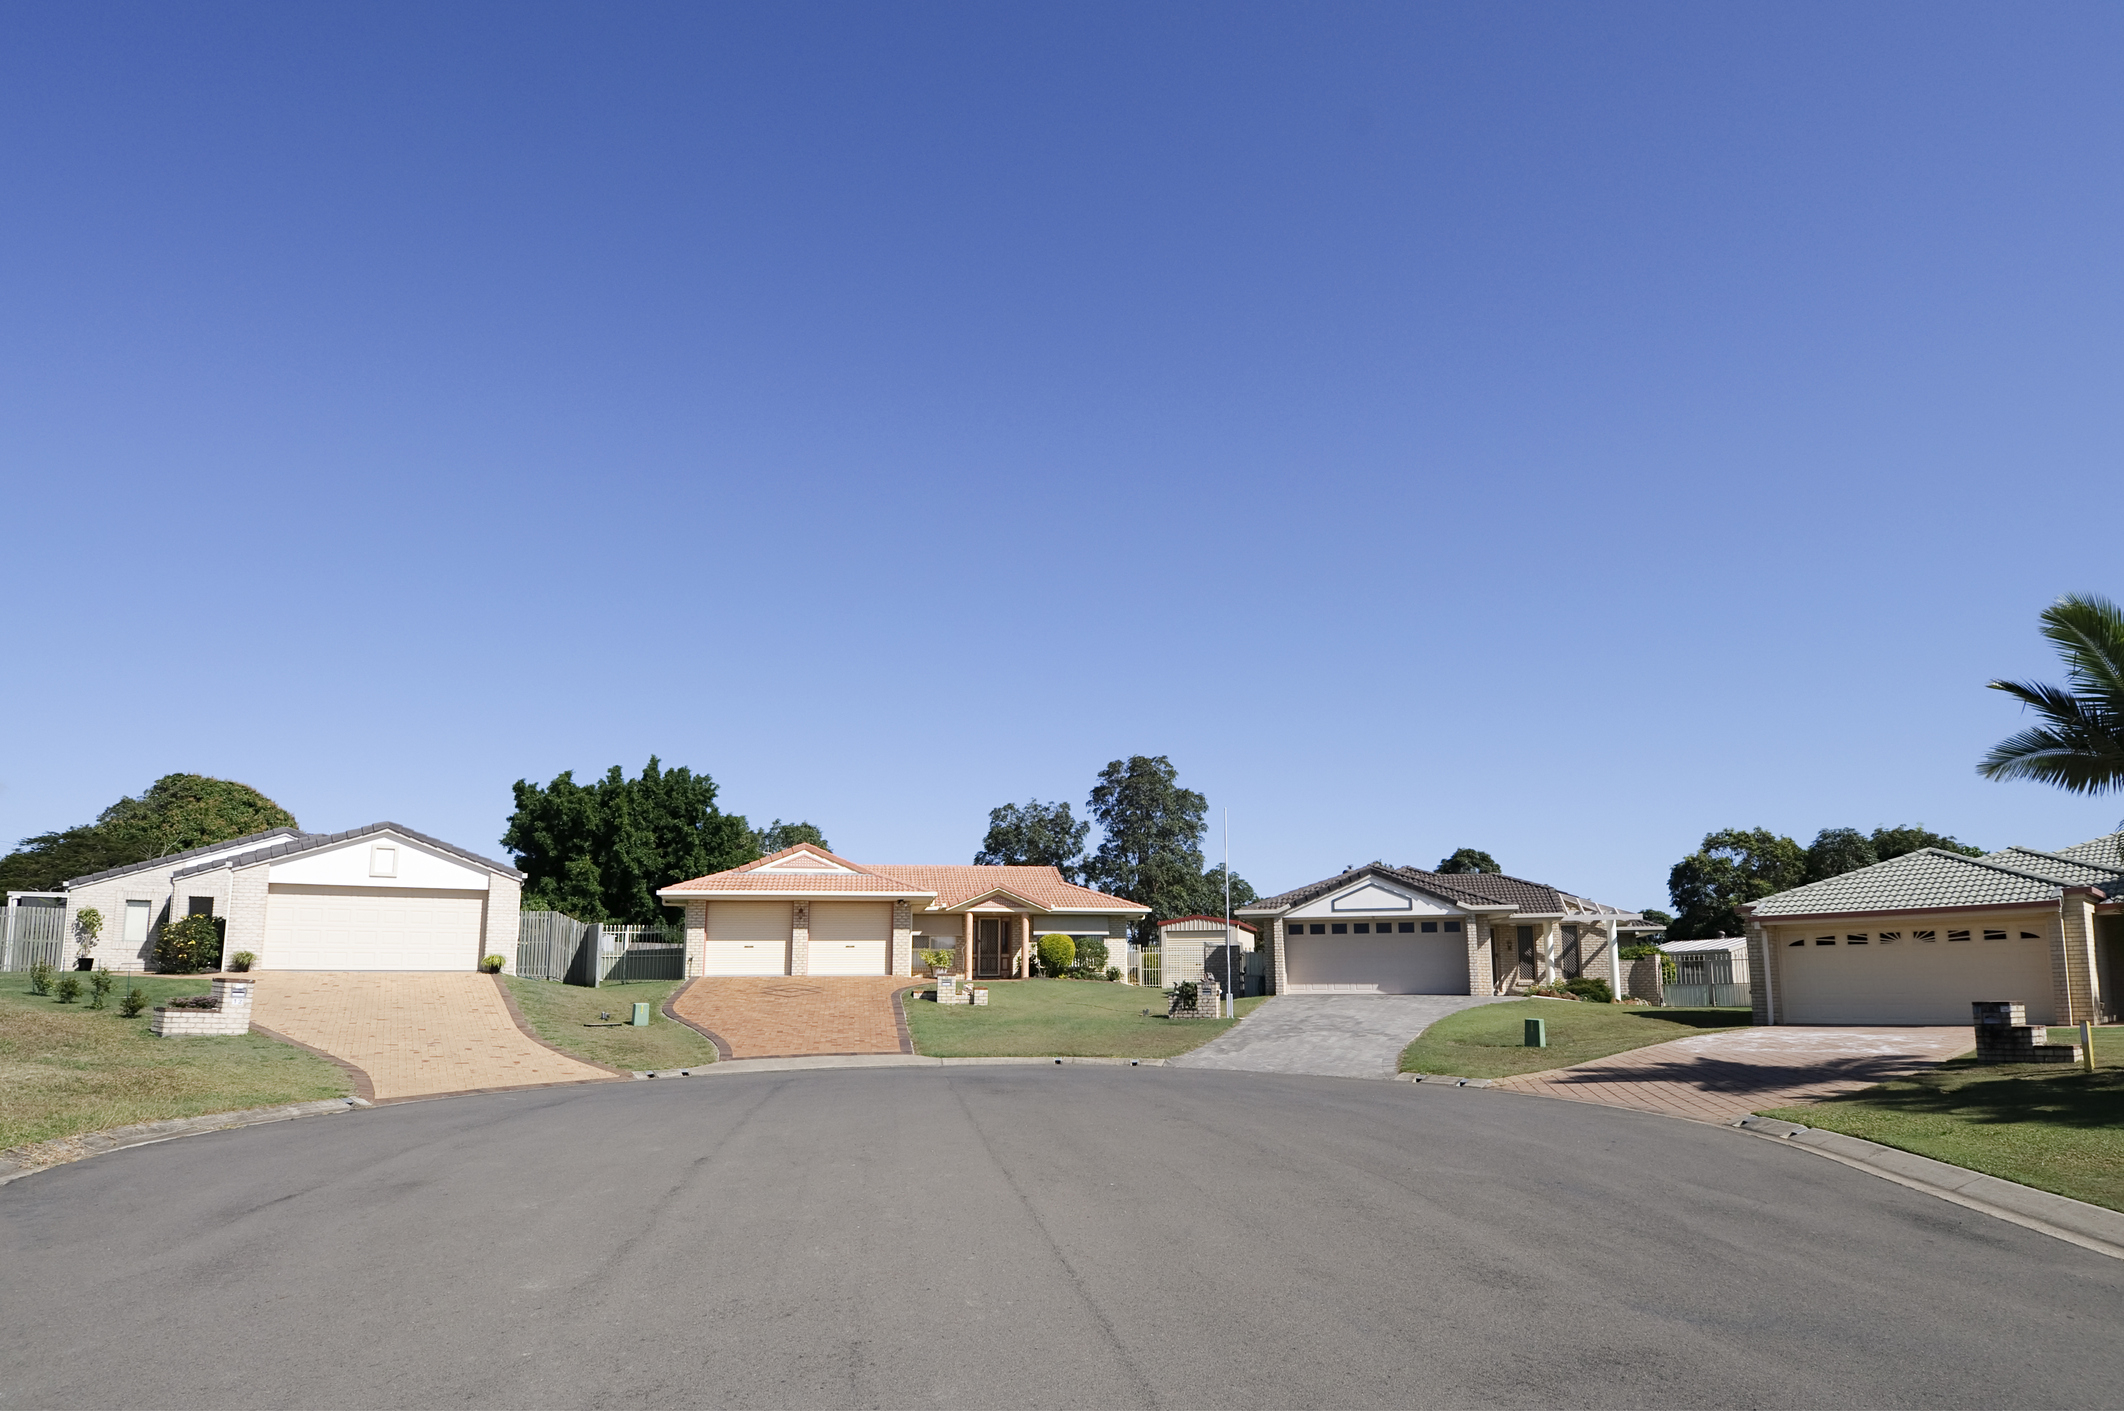 Suburban street view with four houses, driveways and manicured lawns under a clear sky